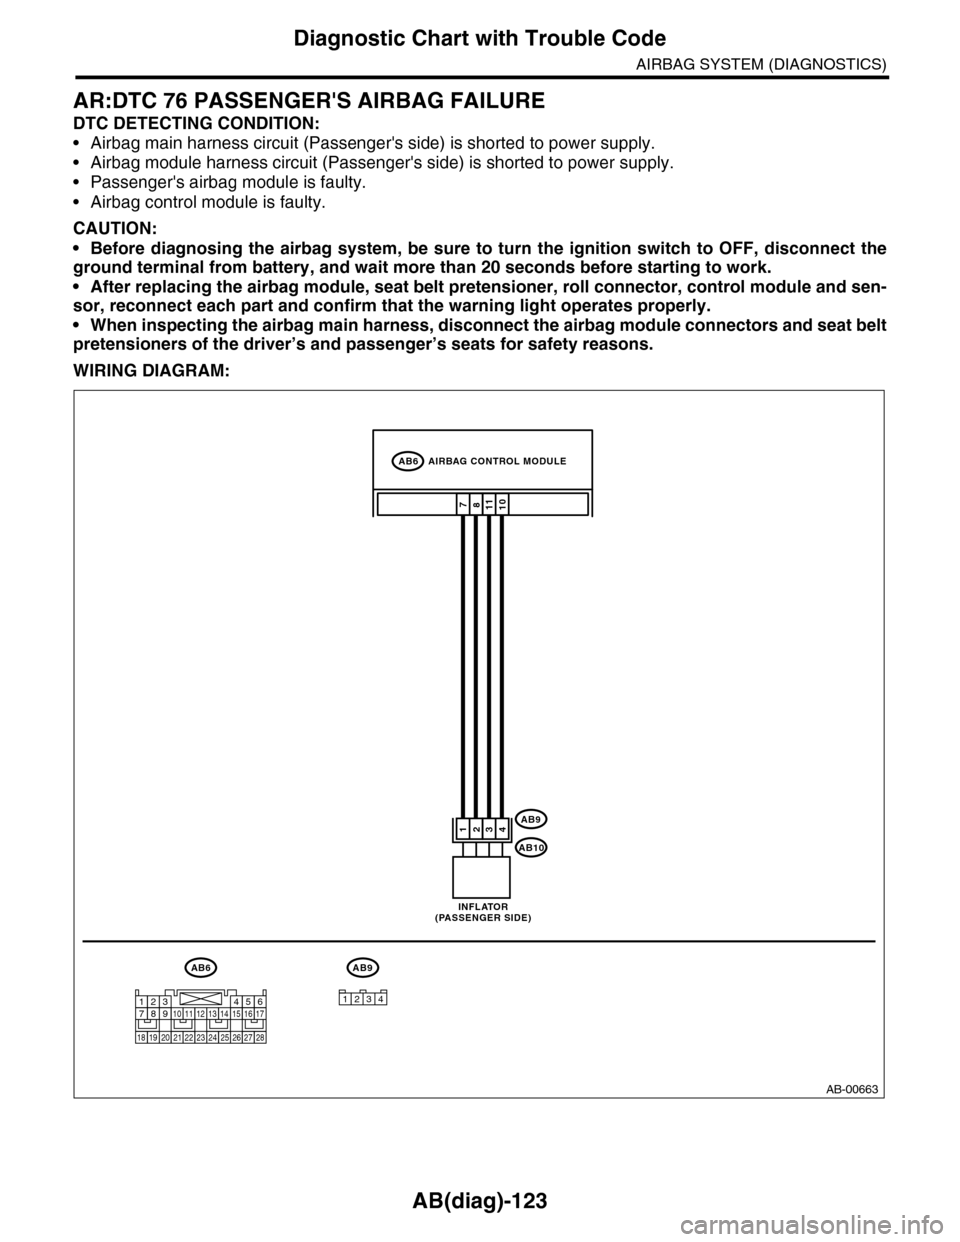 SUBARU TRIBECA 2009 1.G Service Service Manual AB(diag)-123
Diagnostic Chart with Trouble Code
AIRBAG SYSTEM (DIAGNOSTICS)
AR:DTC 76 PASSENGERS AIRBAG FAILURE
DTC DETECTING CONDITION:
•Airbag main harness circuit (Passengers side) is shorted t